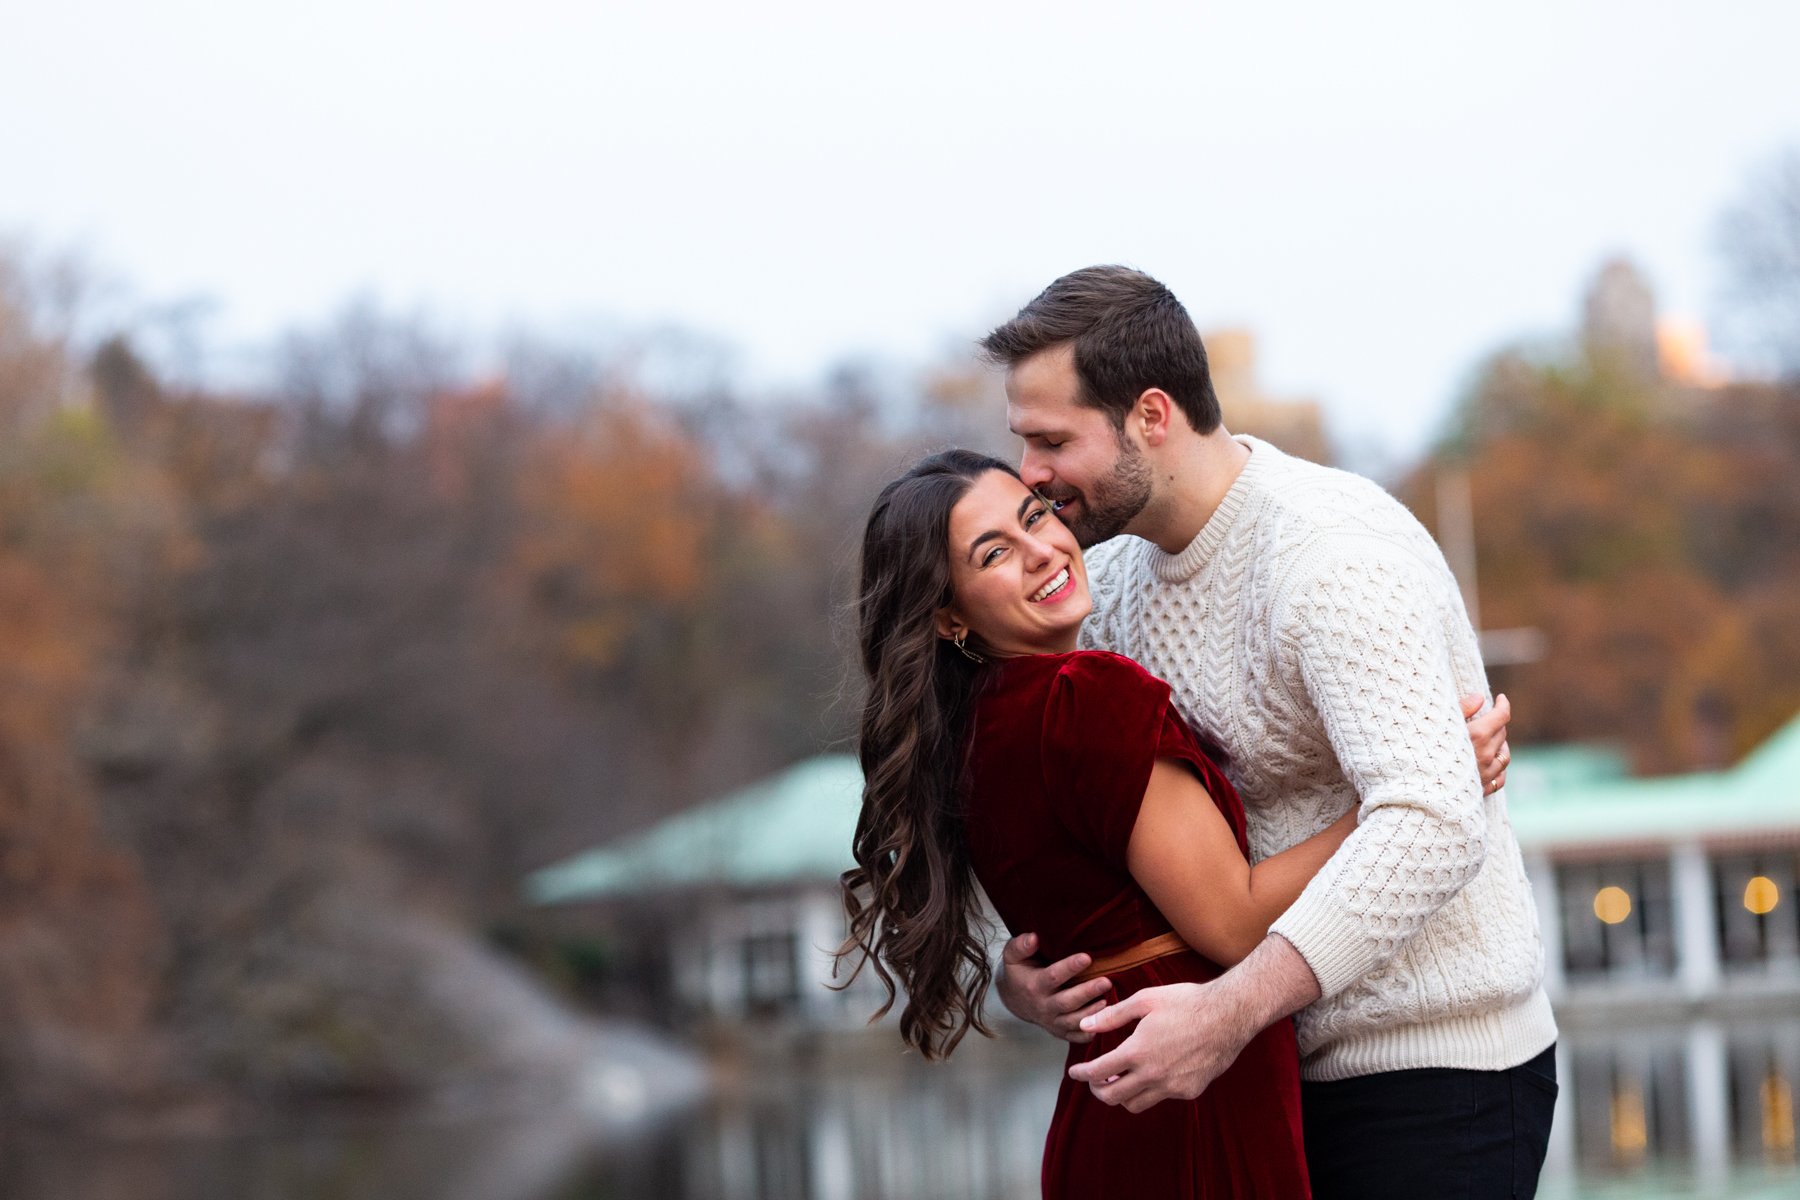 Central Park Fall Foliage Engagement Session NYC Photographer_0015.jpg